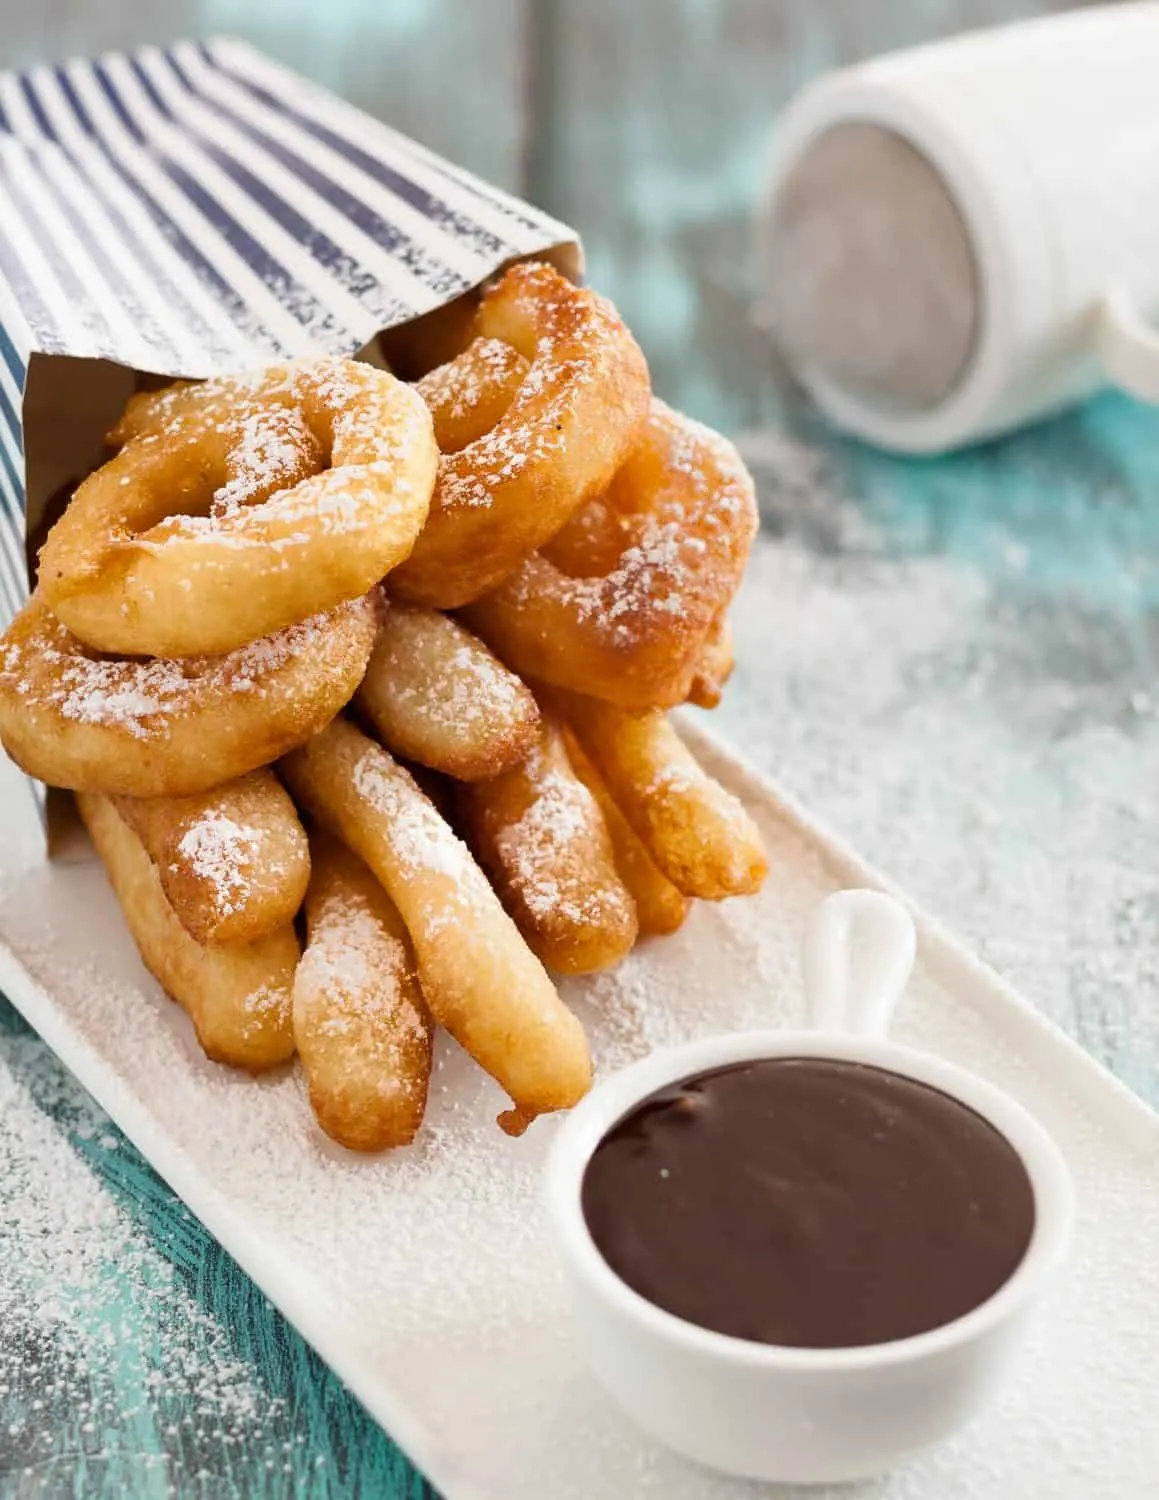  Spanish churros and chocolate are a common snack or even breakfast in Spain. This recipe - inspired by a trip to visit family - is a surprisingly easy Spanish treat. * Recipe on GoodieGodmother.com